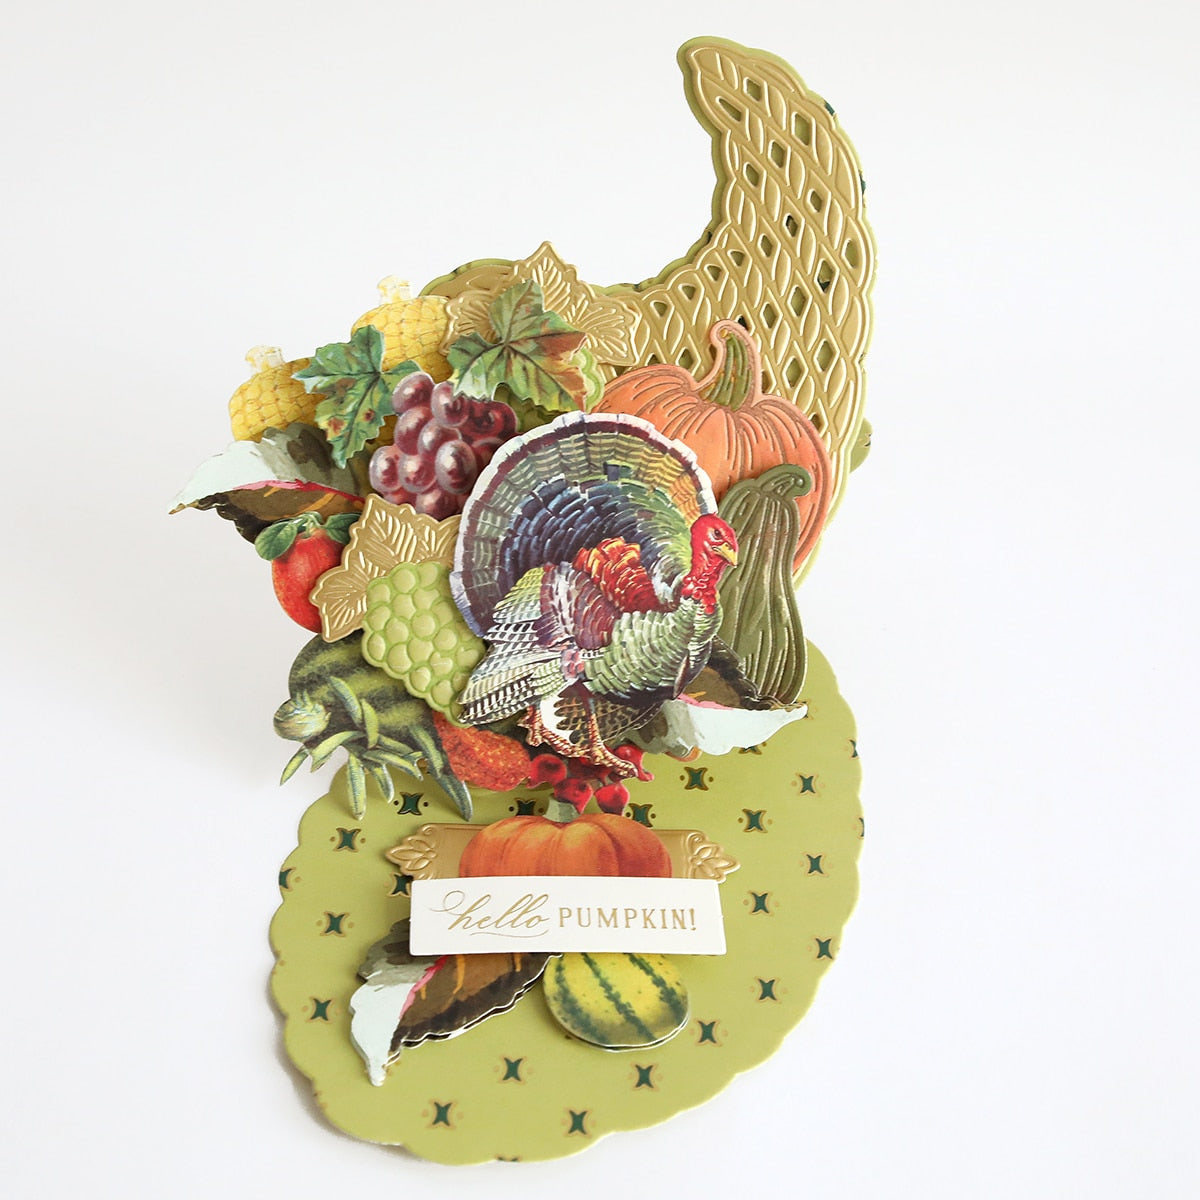 A Cornucopia Easel Card Dies with a turkey and vegetables on it.